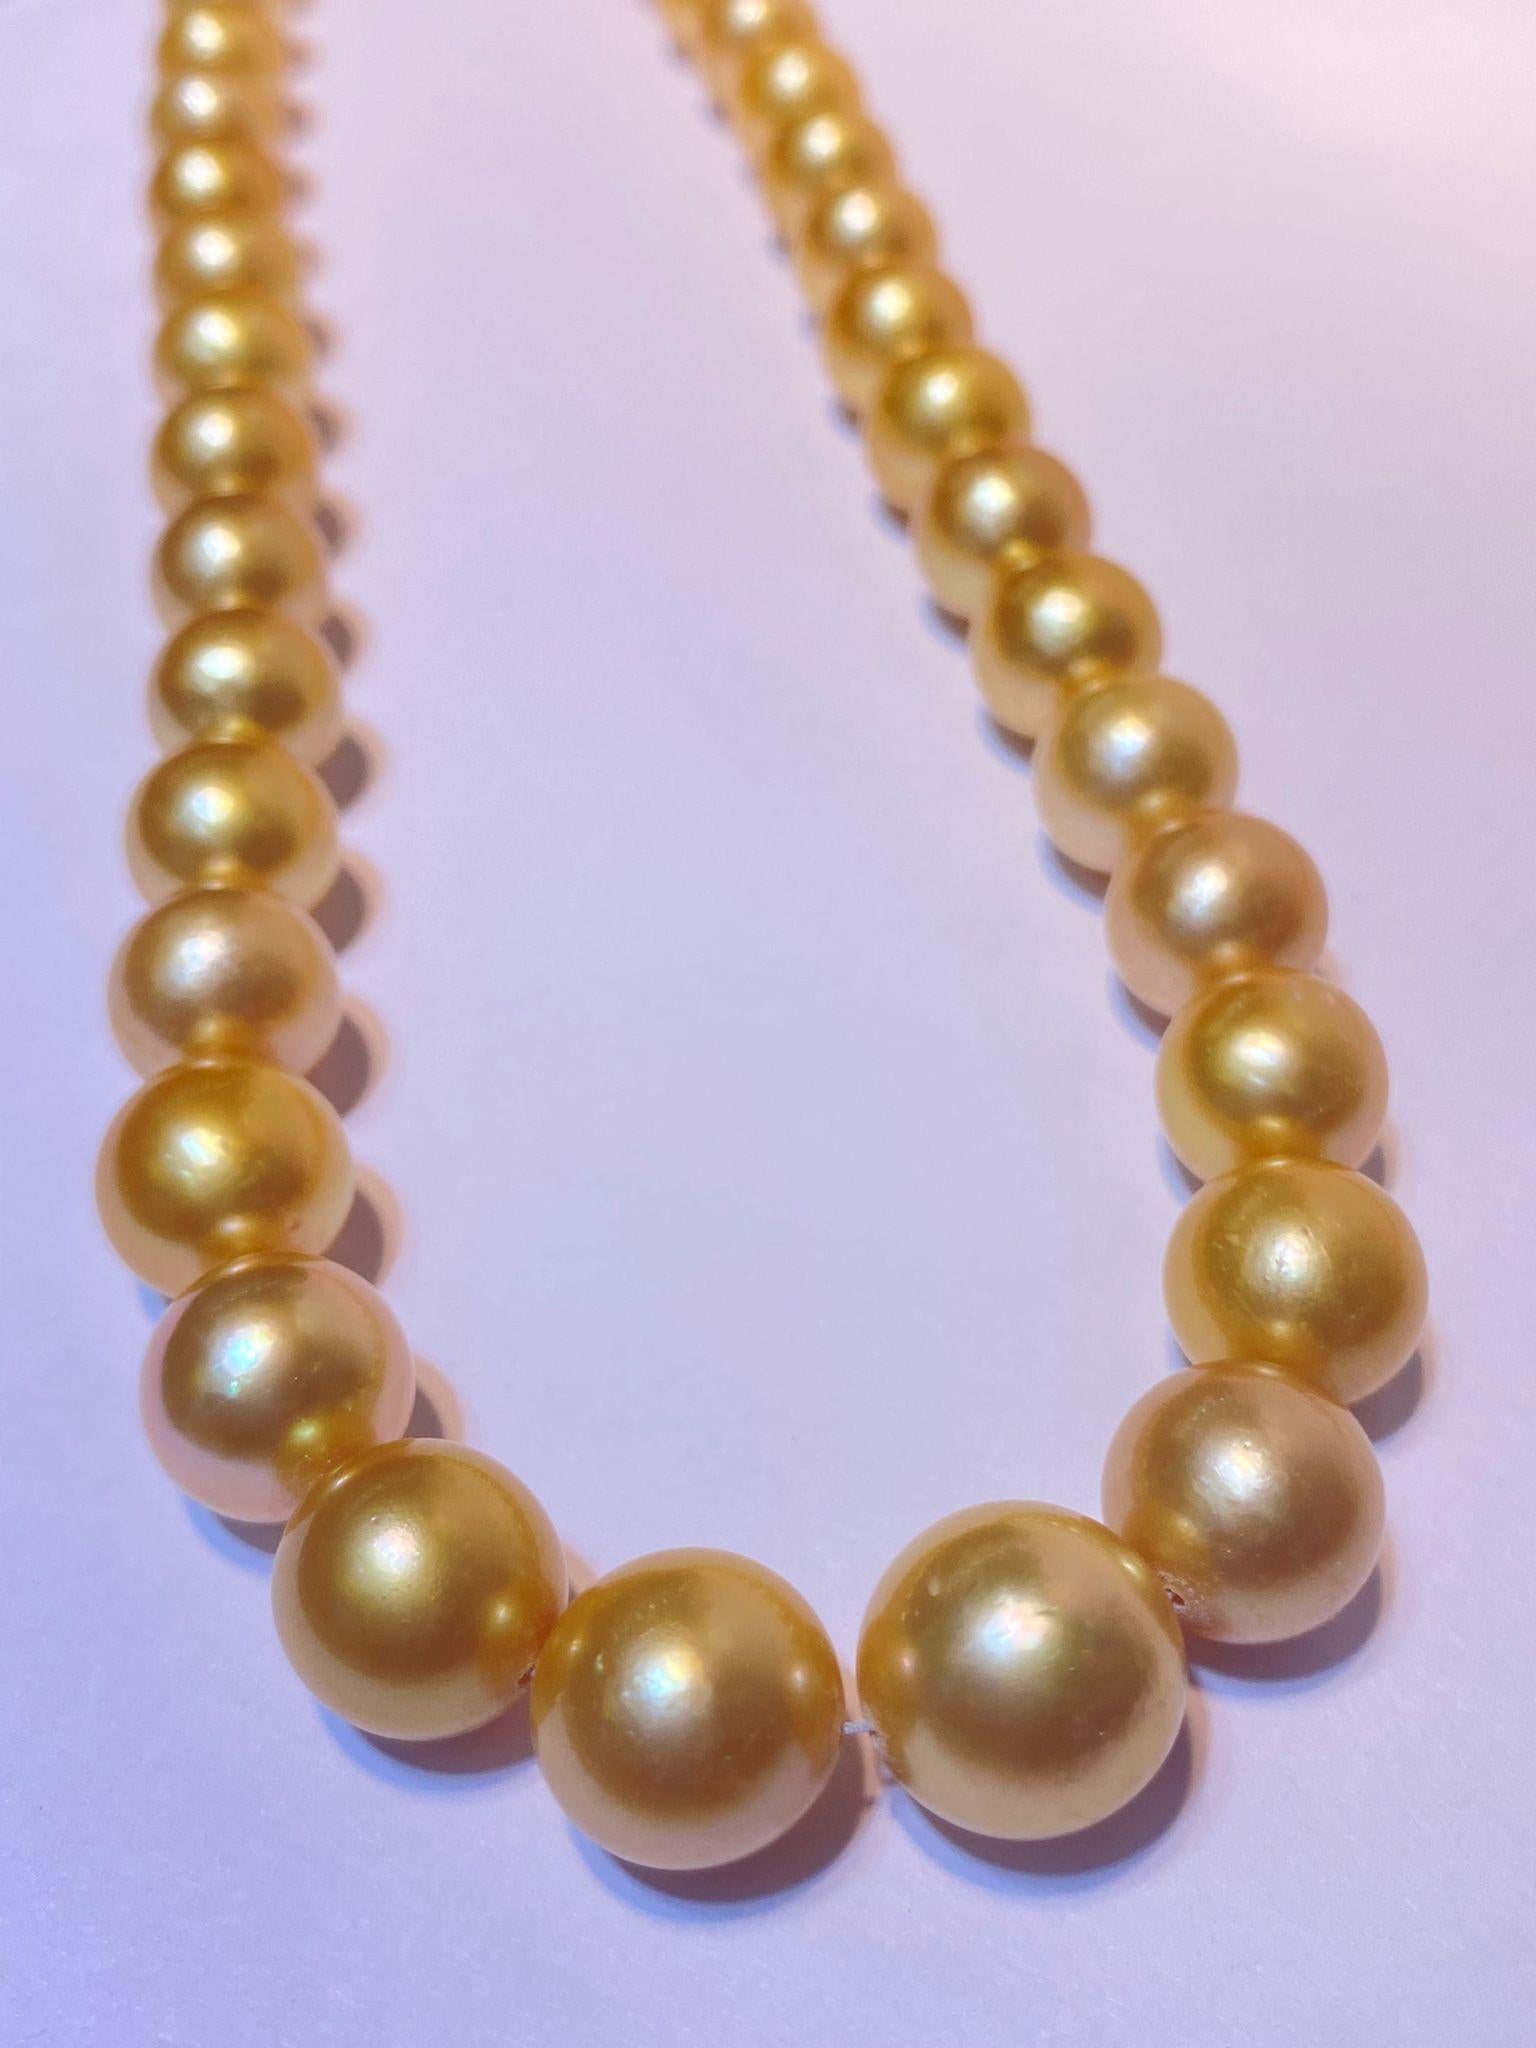 Round Cut Round Golden South Sea Pearl 37pcs Will Be More When Strung For Sale